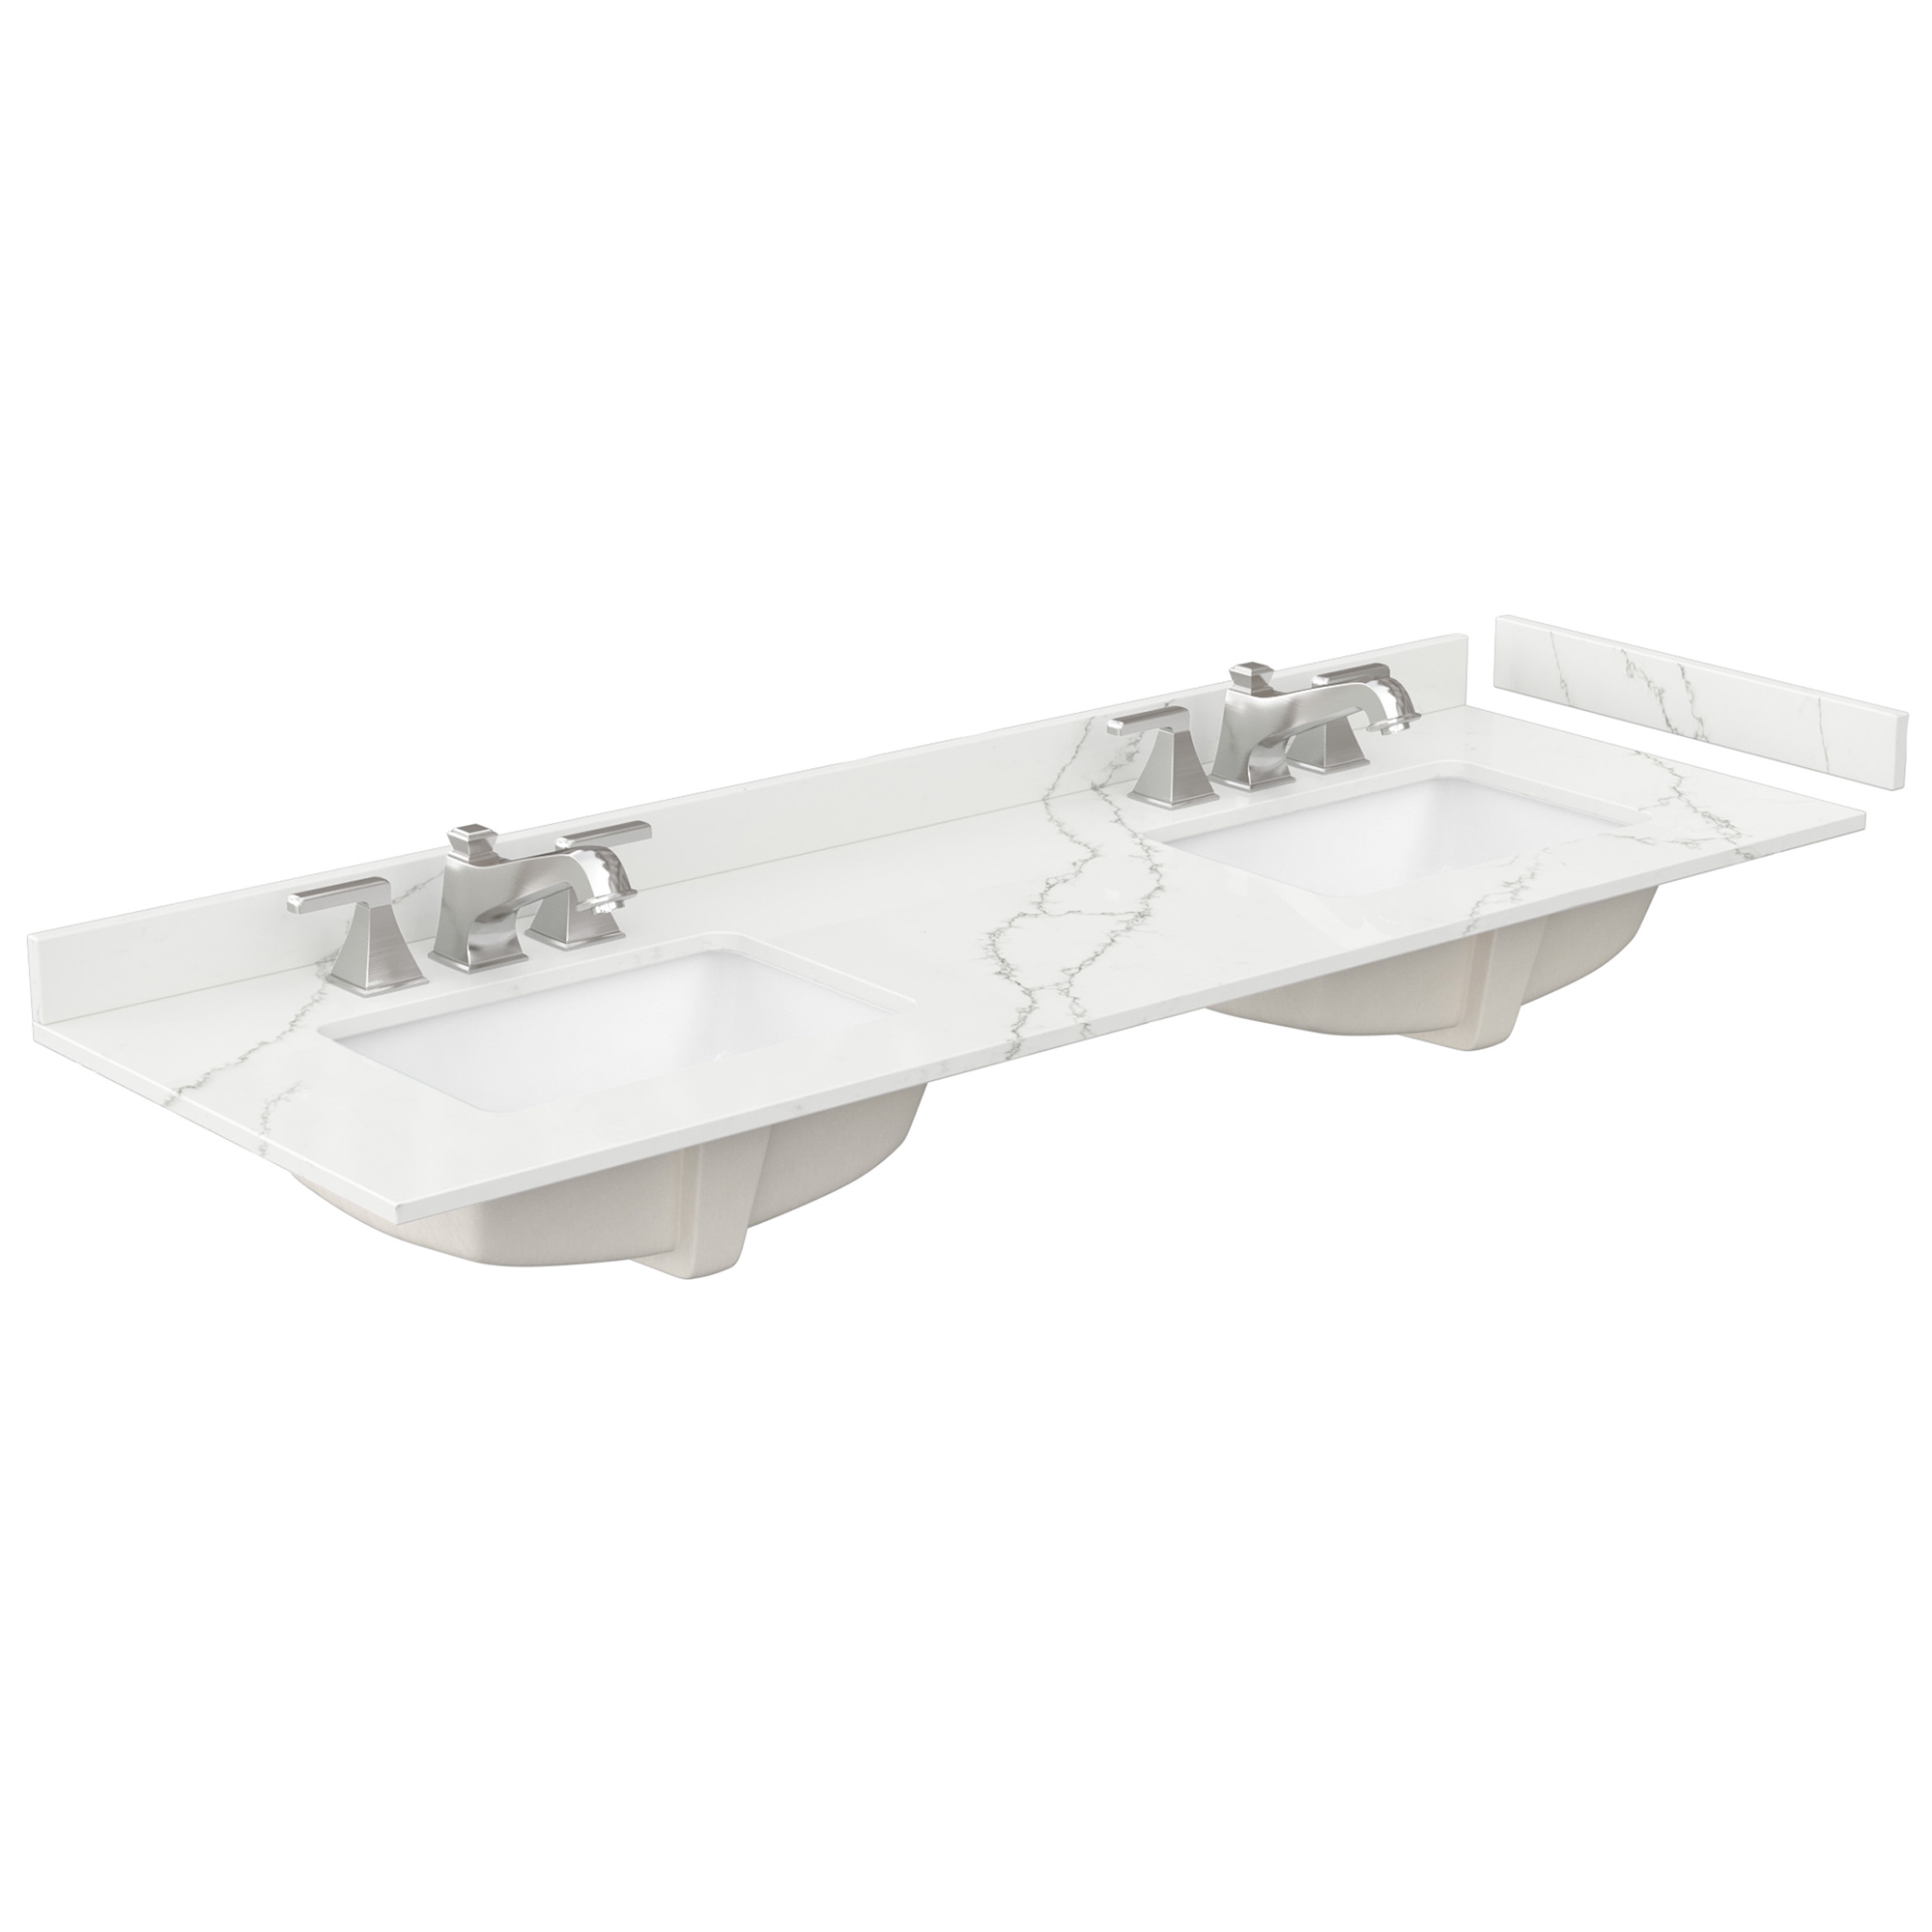 66" Double Countertop - Giotto Quartz (8066) with Undermount Square Sinks (3-Hole) - Includes Backsplash and Sidesplash WCFQC366DTOPUNSGT